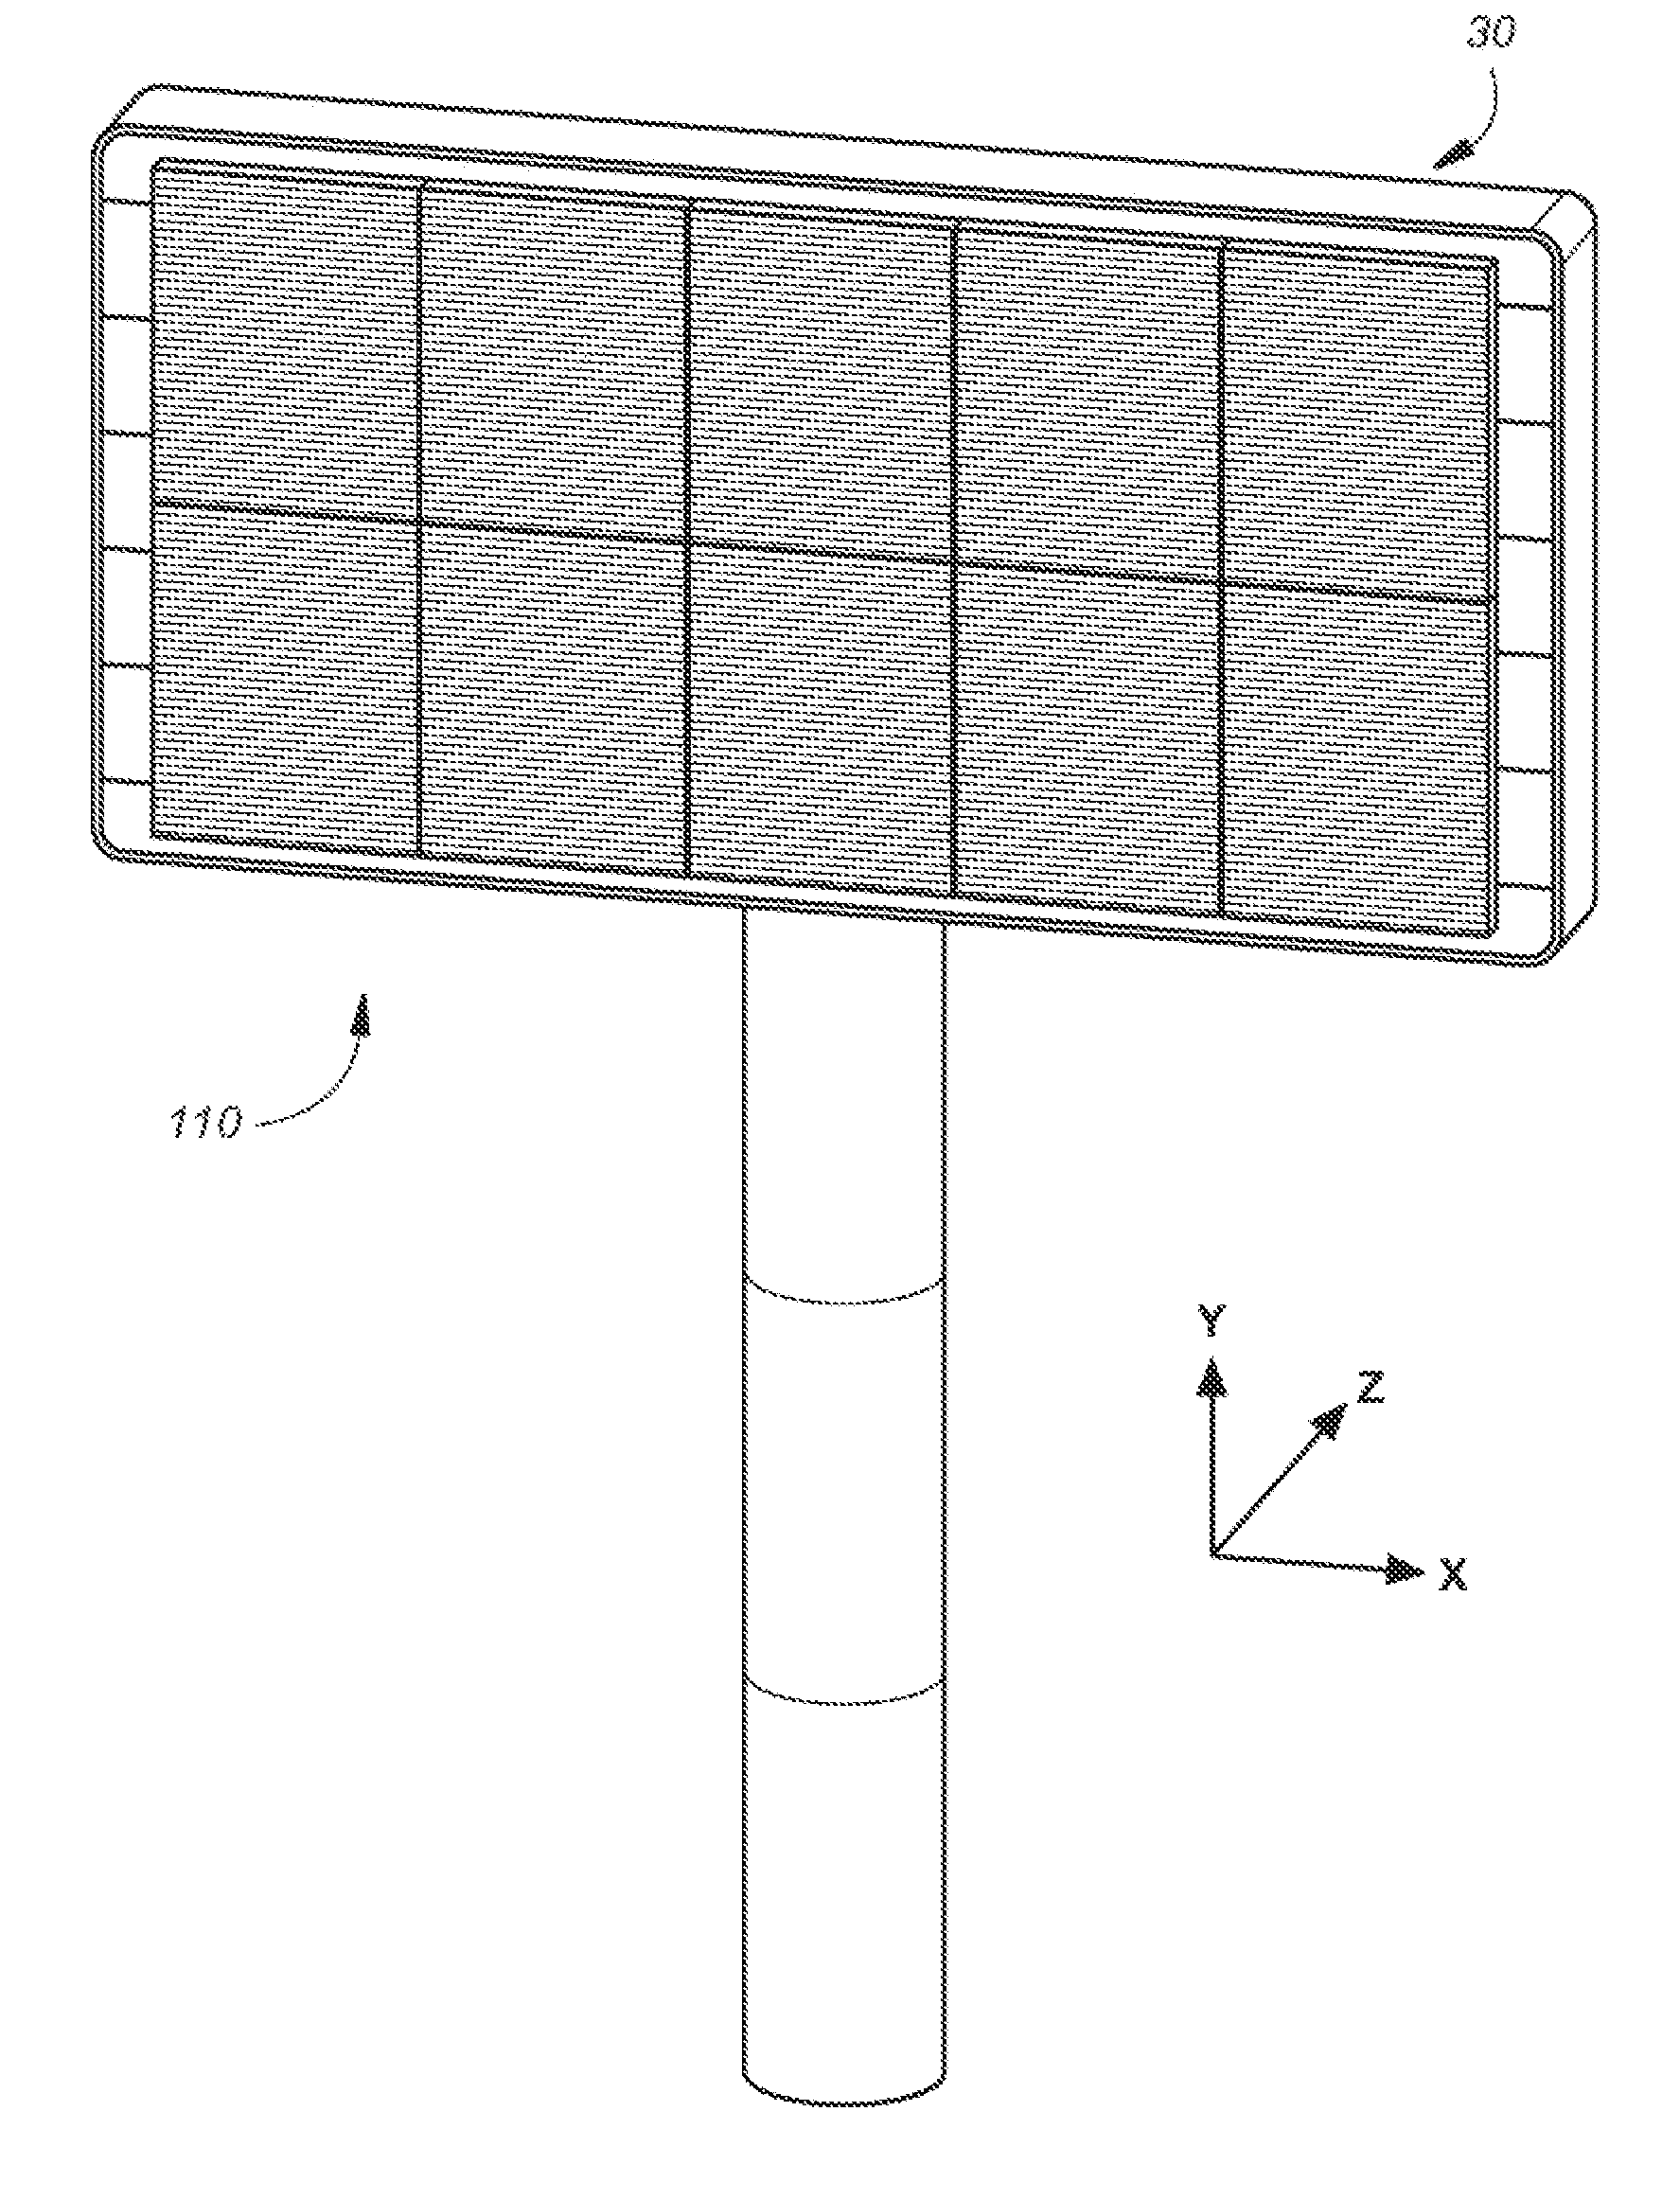 Sign construction with sectional sign assemblies and installation kit and method of using same